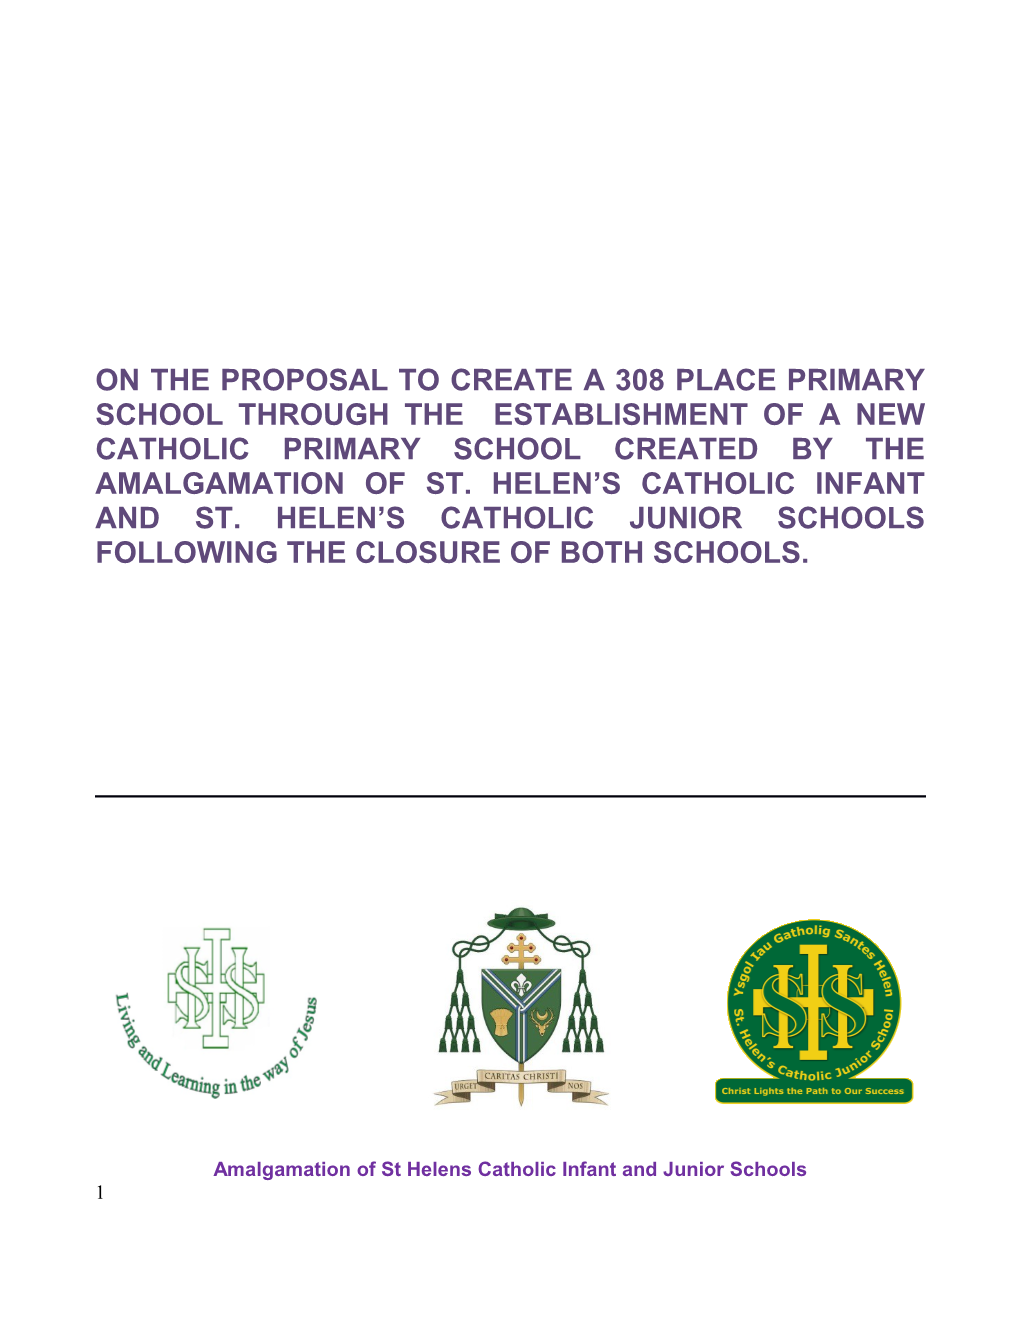 On the Proposal to Create a 308 Place Primary School Through the Establishment of a New